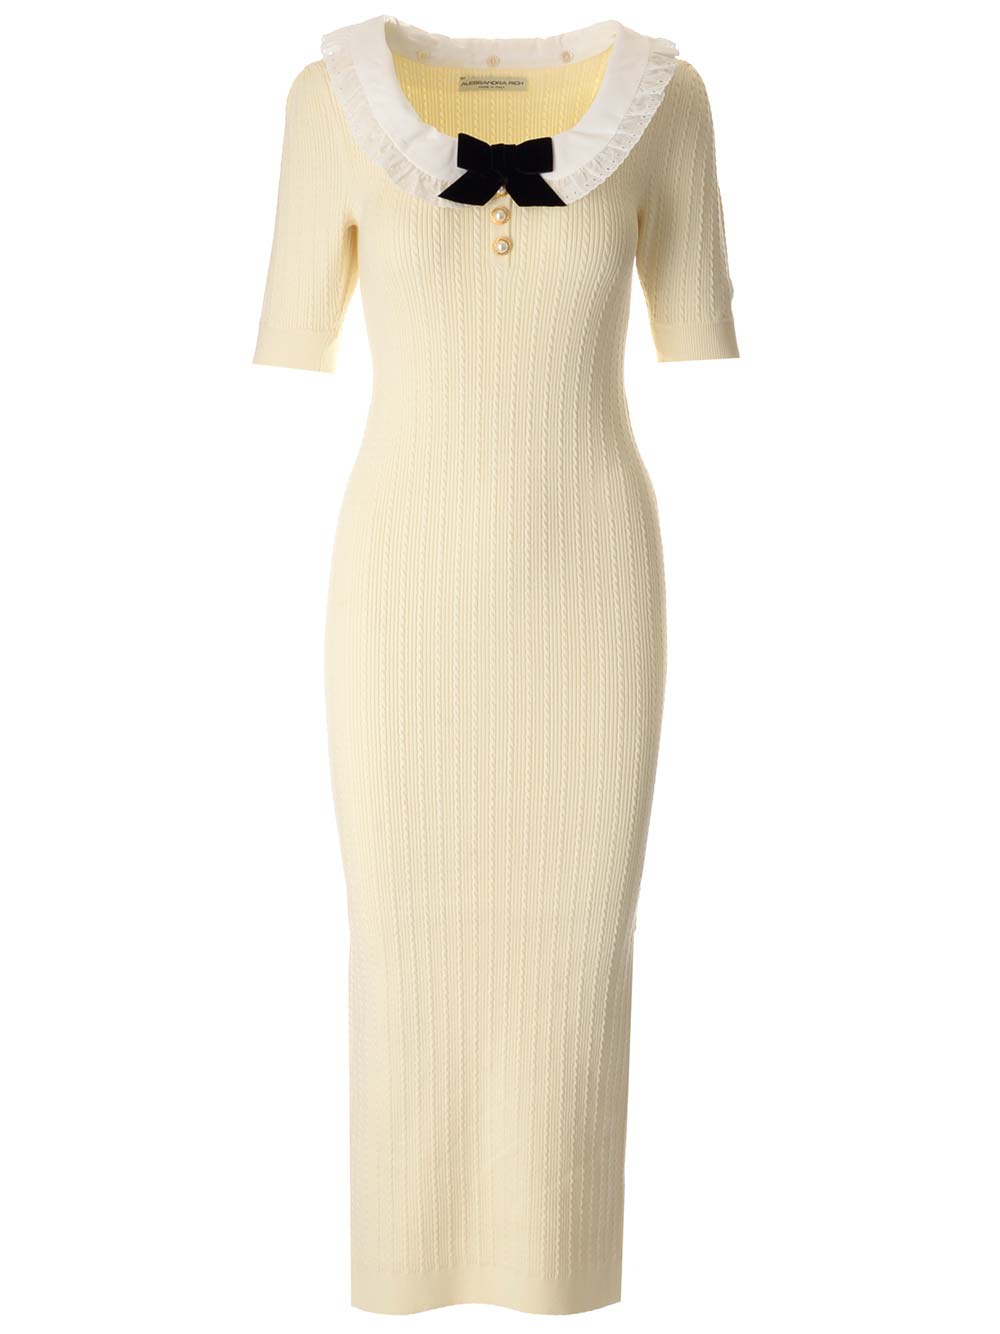 ALESSANDRA RICH LONG KNIT DRESS WITH COLLAR